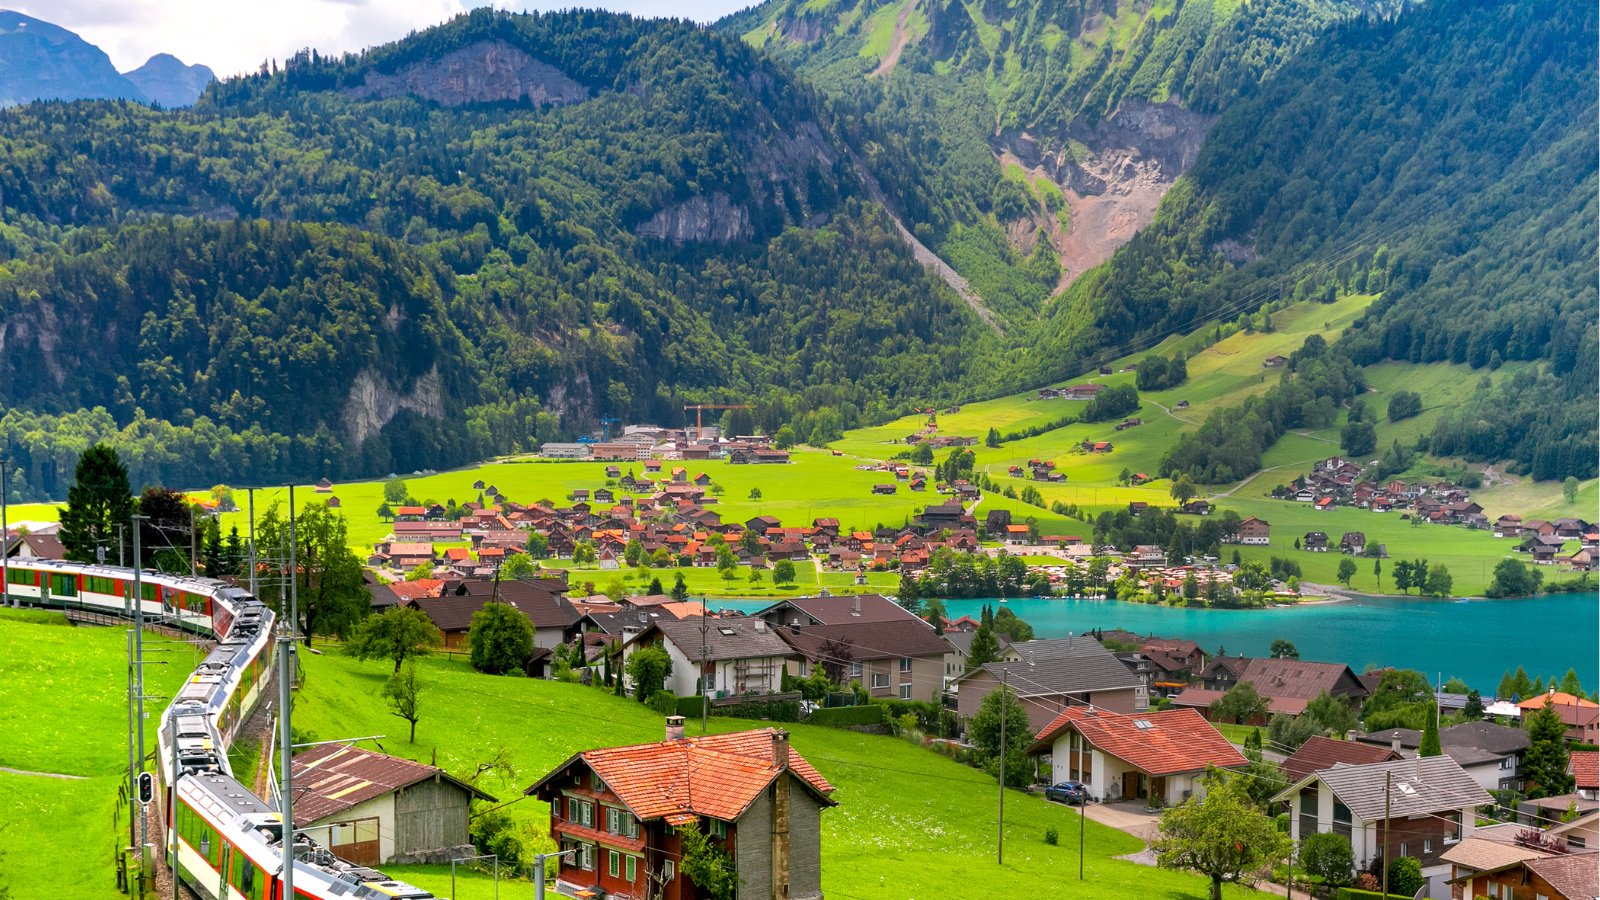 Switzerland - the destination of the journey to make 10 best things to do in Switzerland